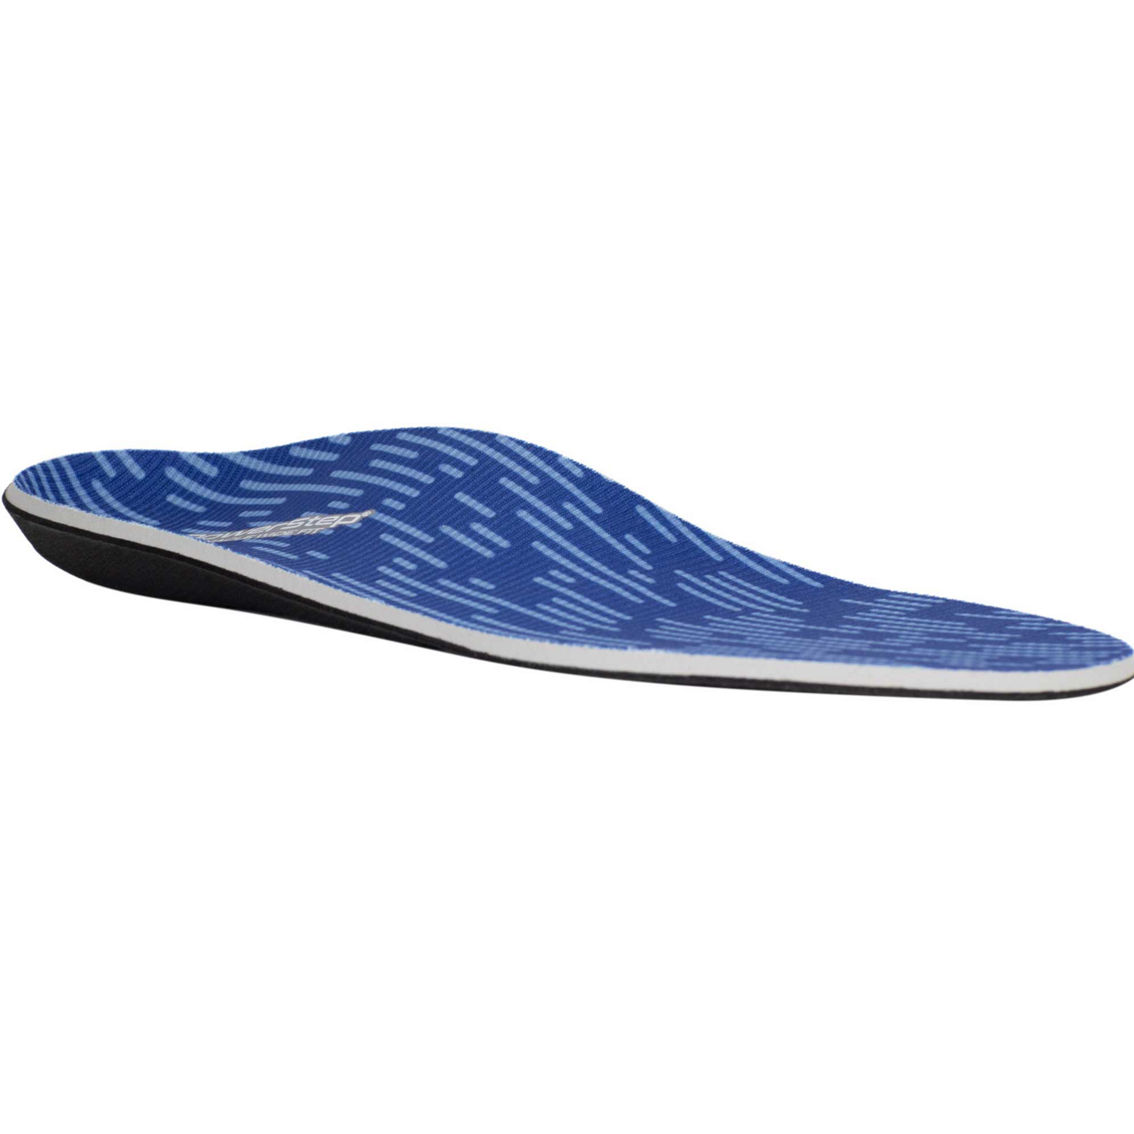 Powerstep Wide Fit Full Length Orthotic Shoe Insoles - Image 6 of 6